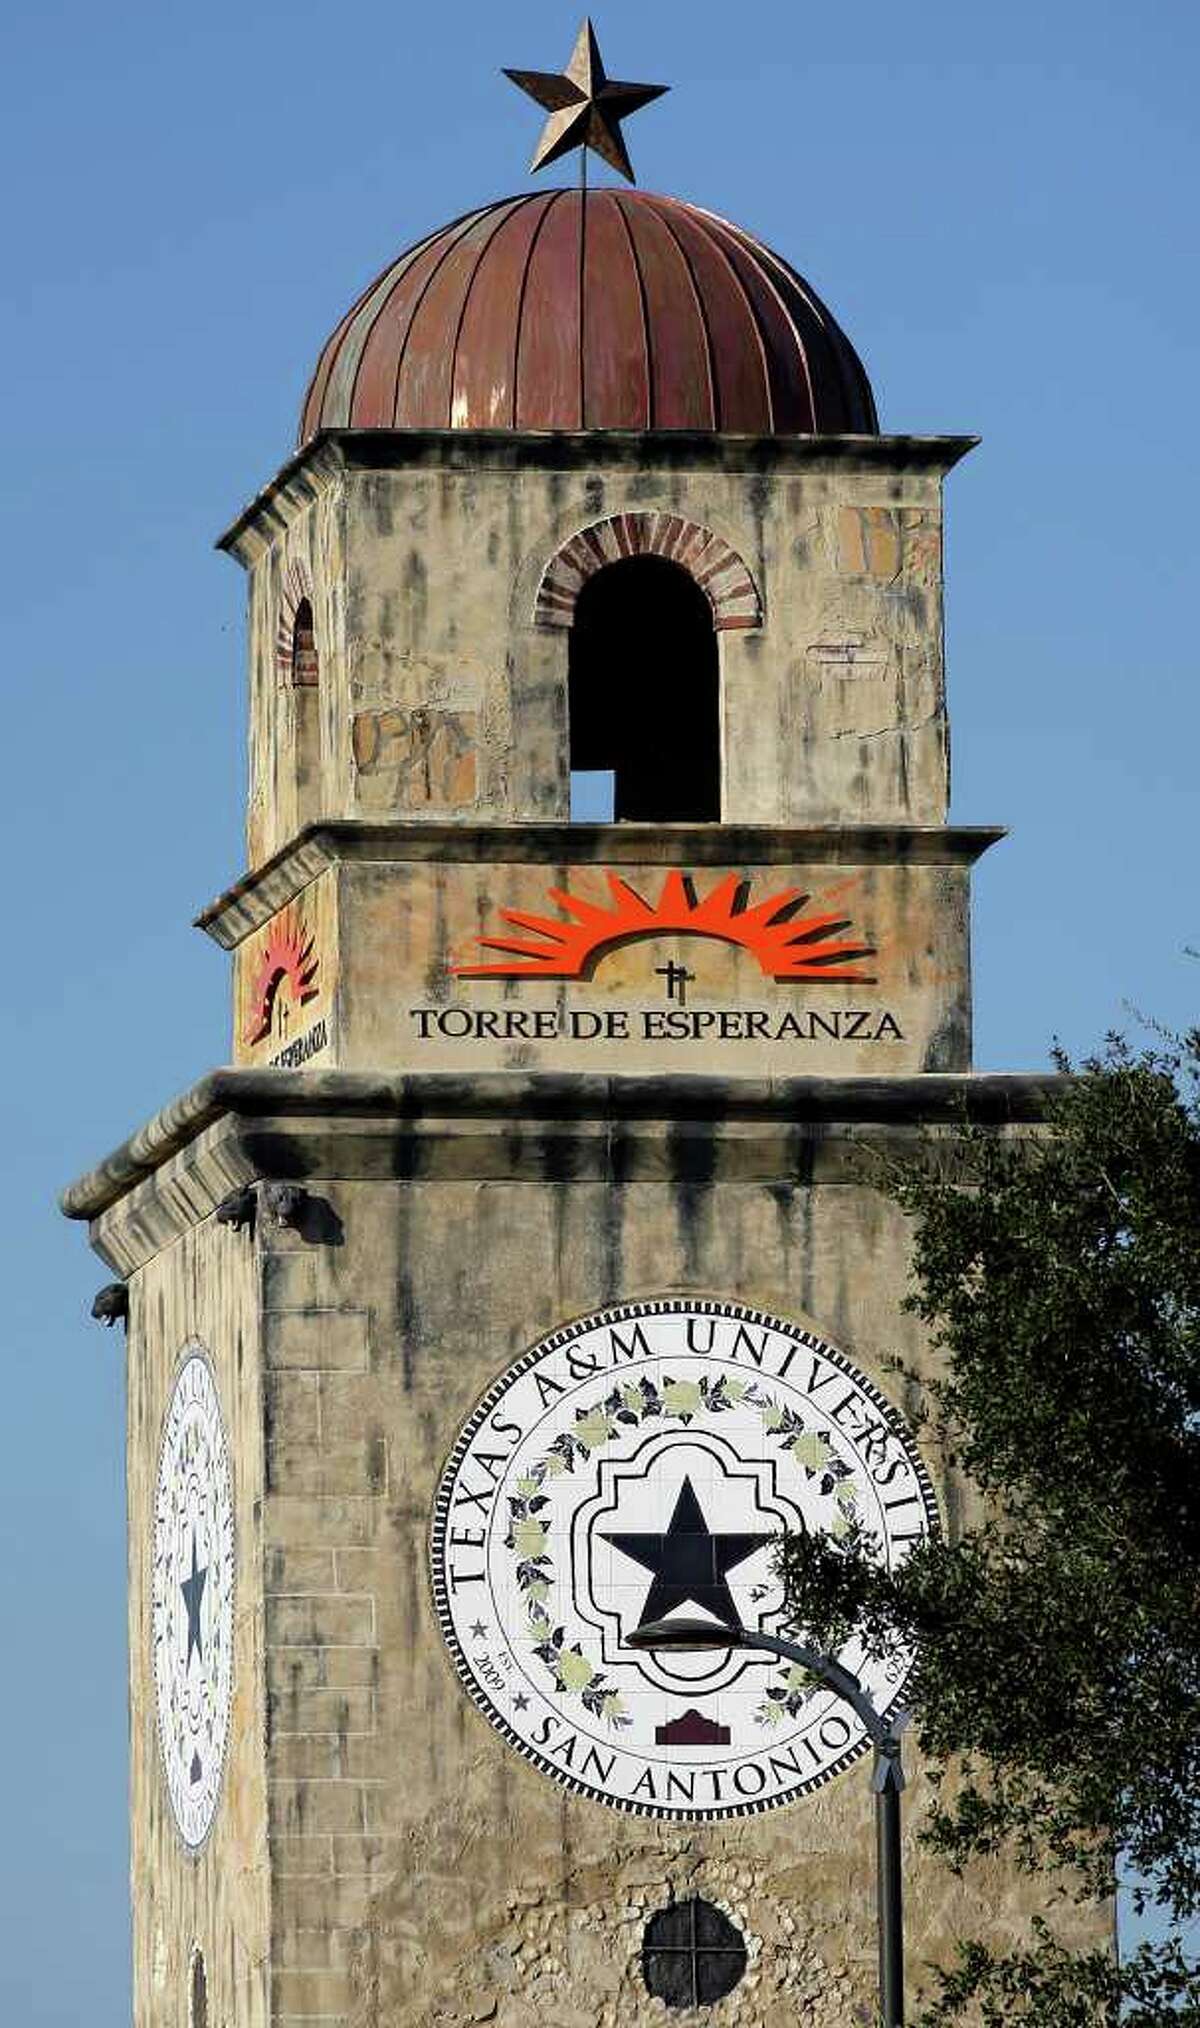 A spokeswoman for Texas A&M University-San Antonio says the crosses are meant to evoke the Spanish missions. She said the university had an opportunity to review the design.